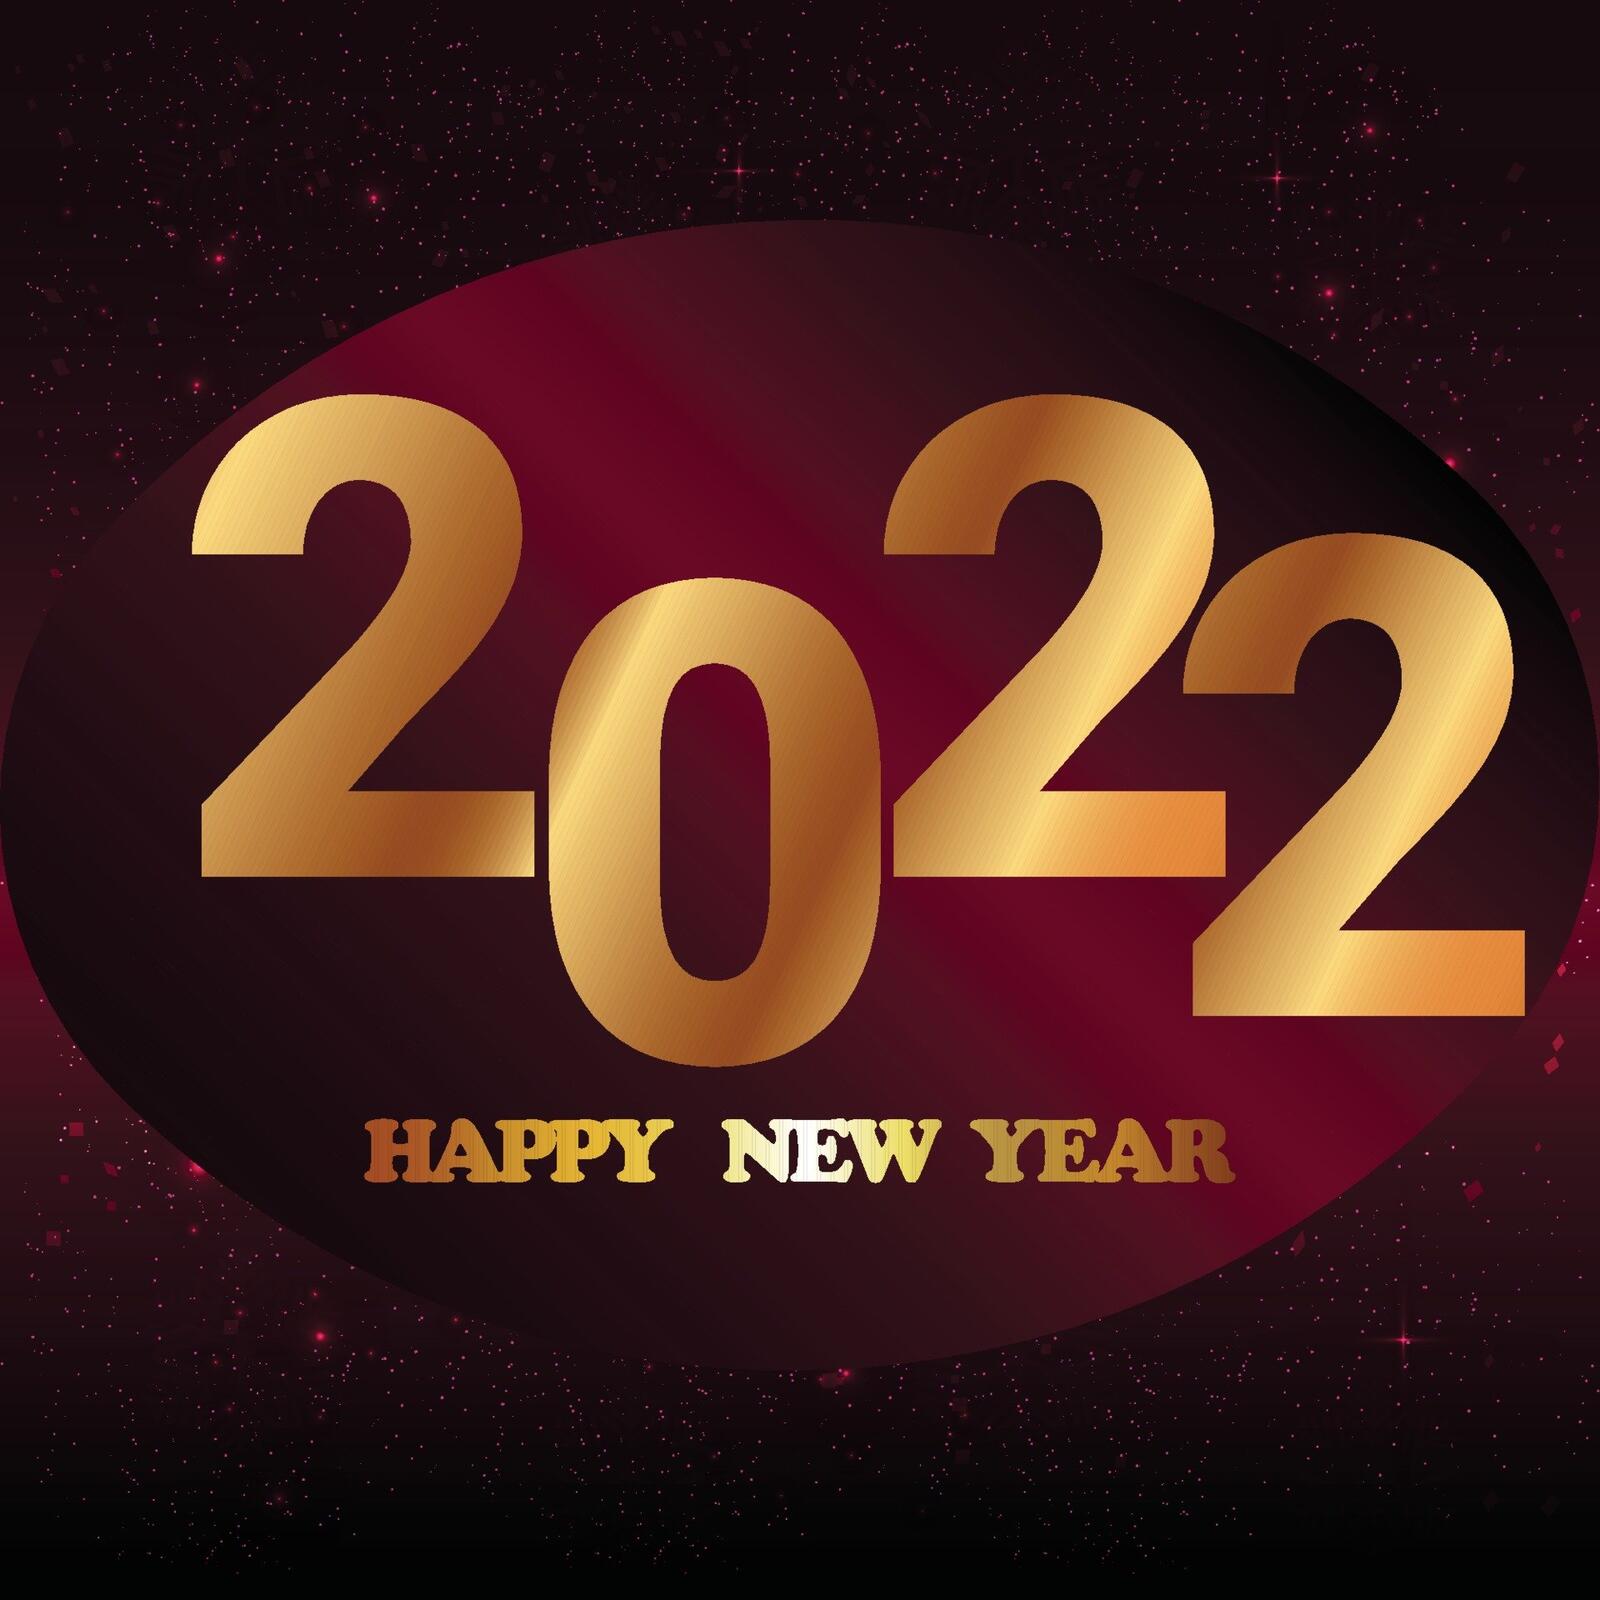 Wallpapers 2022 holidays happy new year 2022 on the desktop